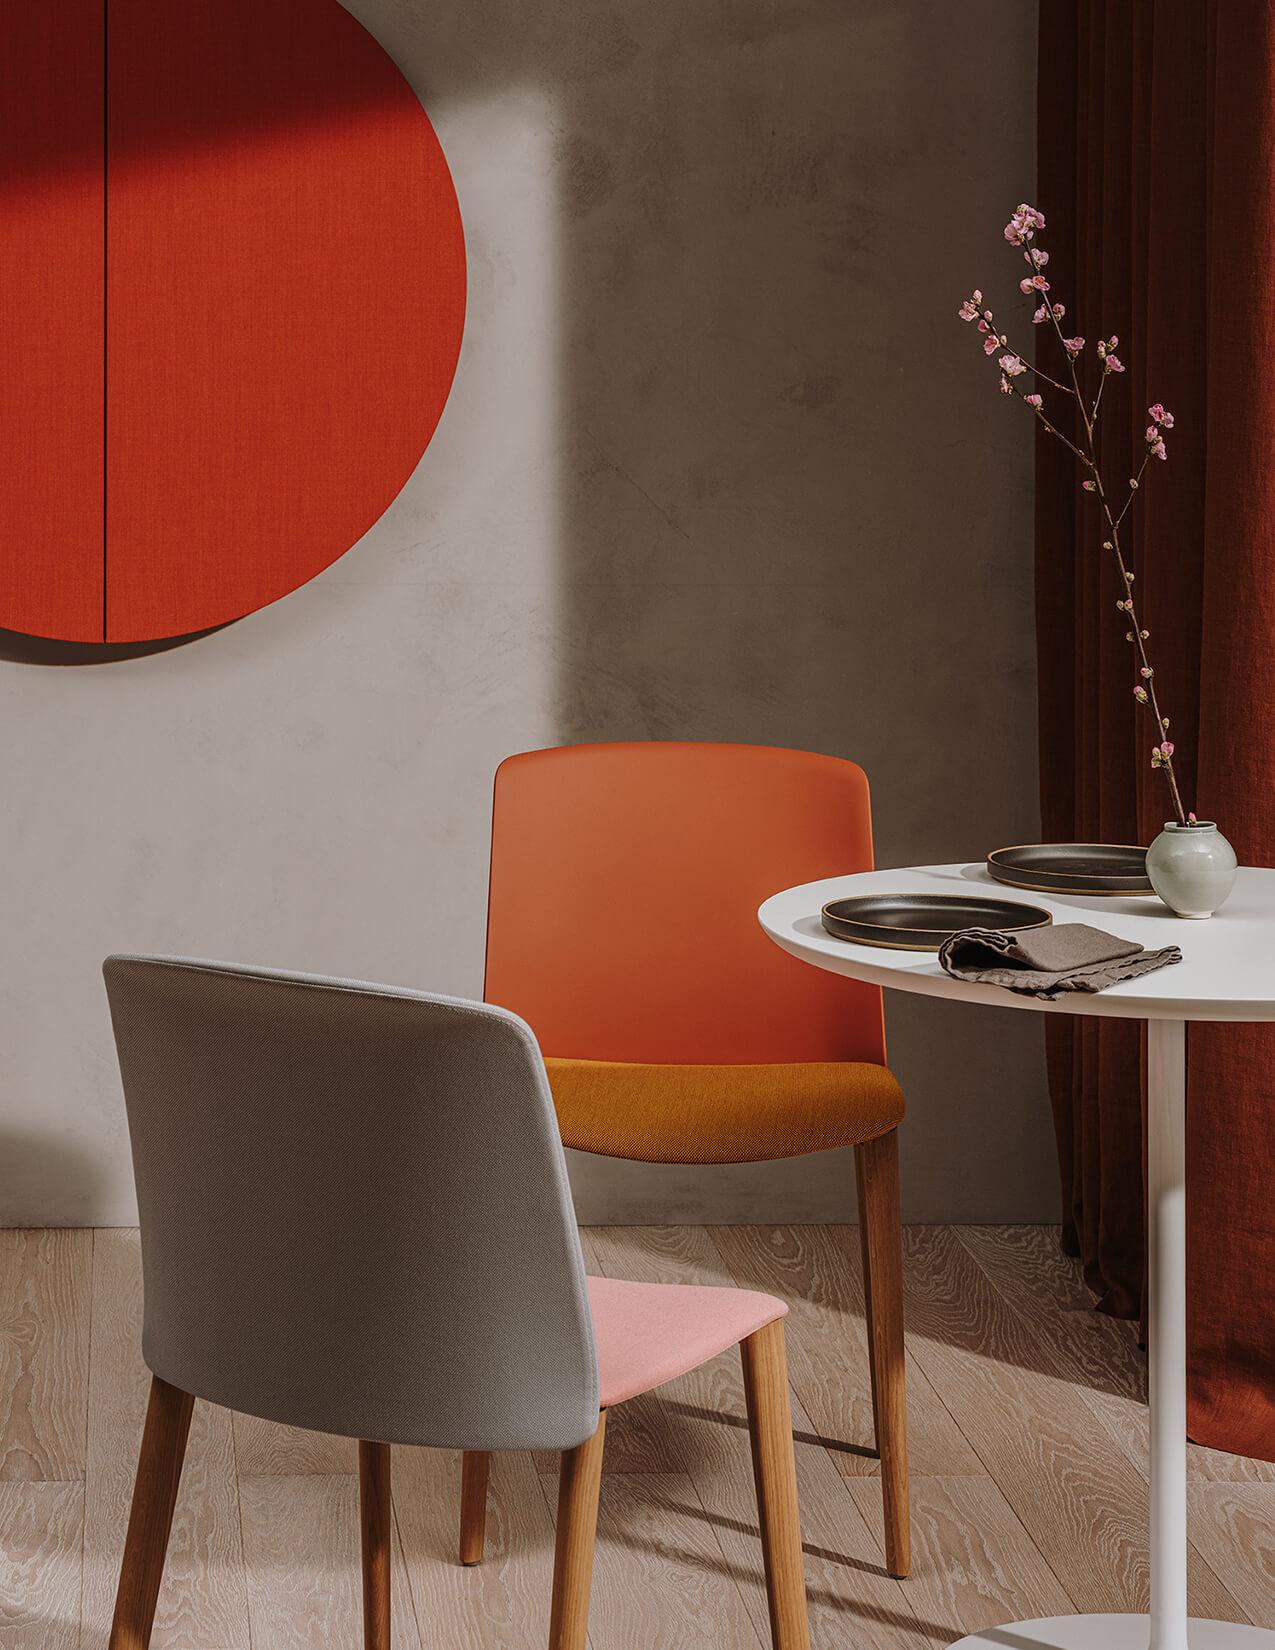 chairs, a table, and circular acoustic panel in an interior